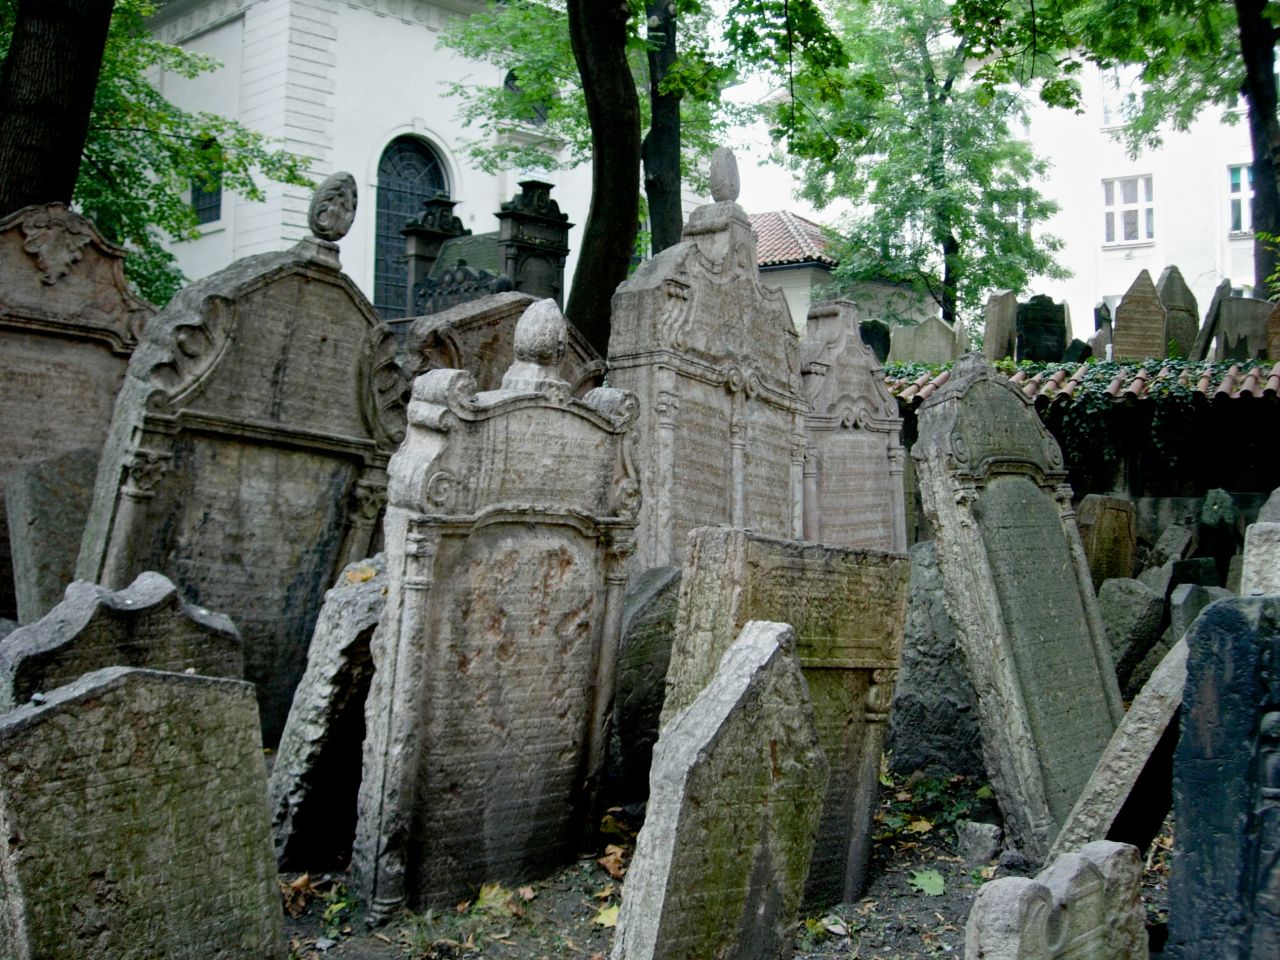 At one time, Prague required that Jews only be buried on a single city block. Now called the Old Jewish Cemetery, the burial ground was used  from the early 15th century until 1787.